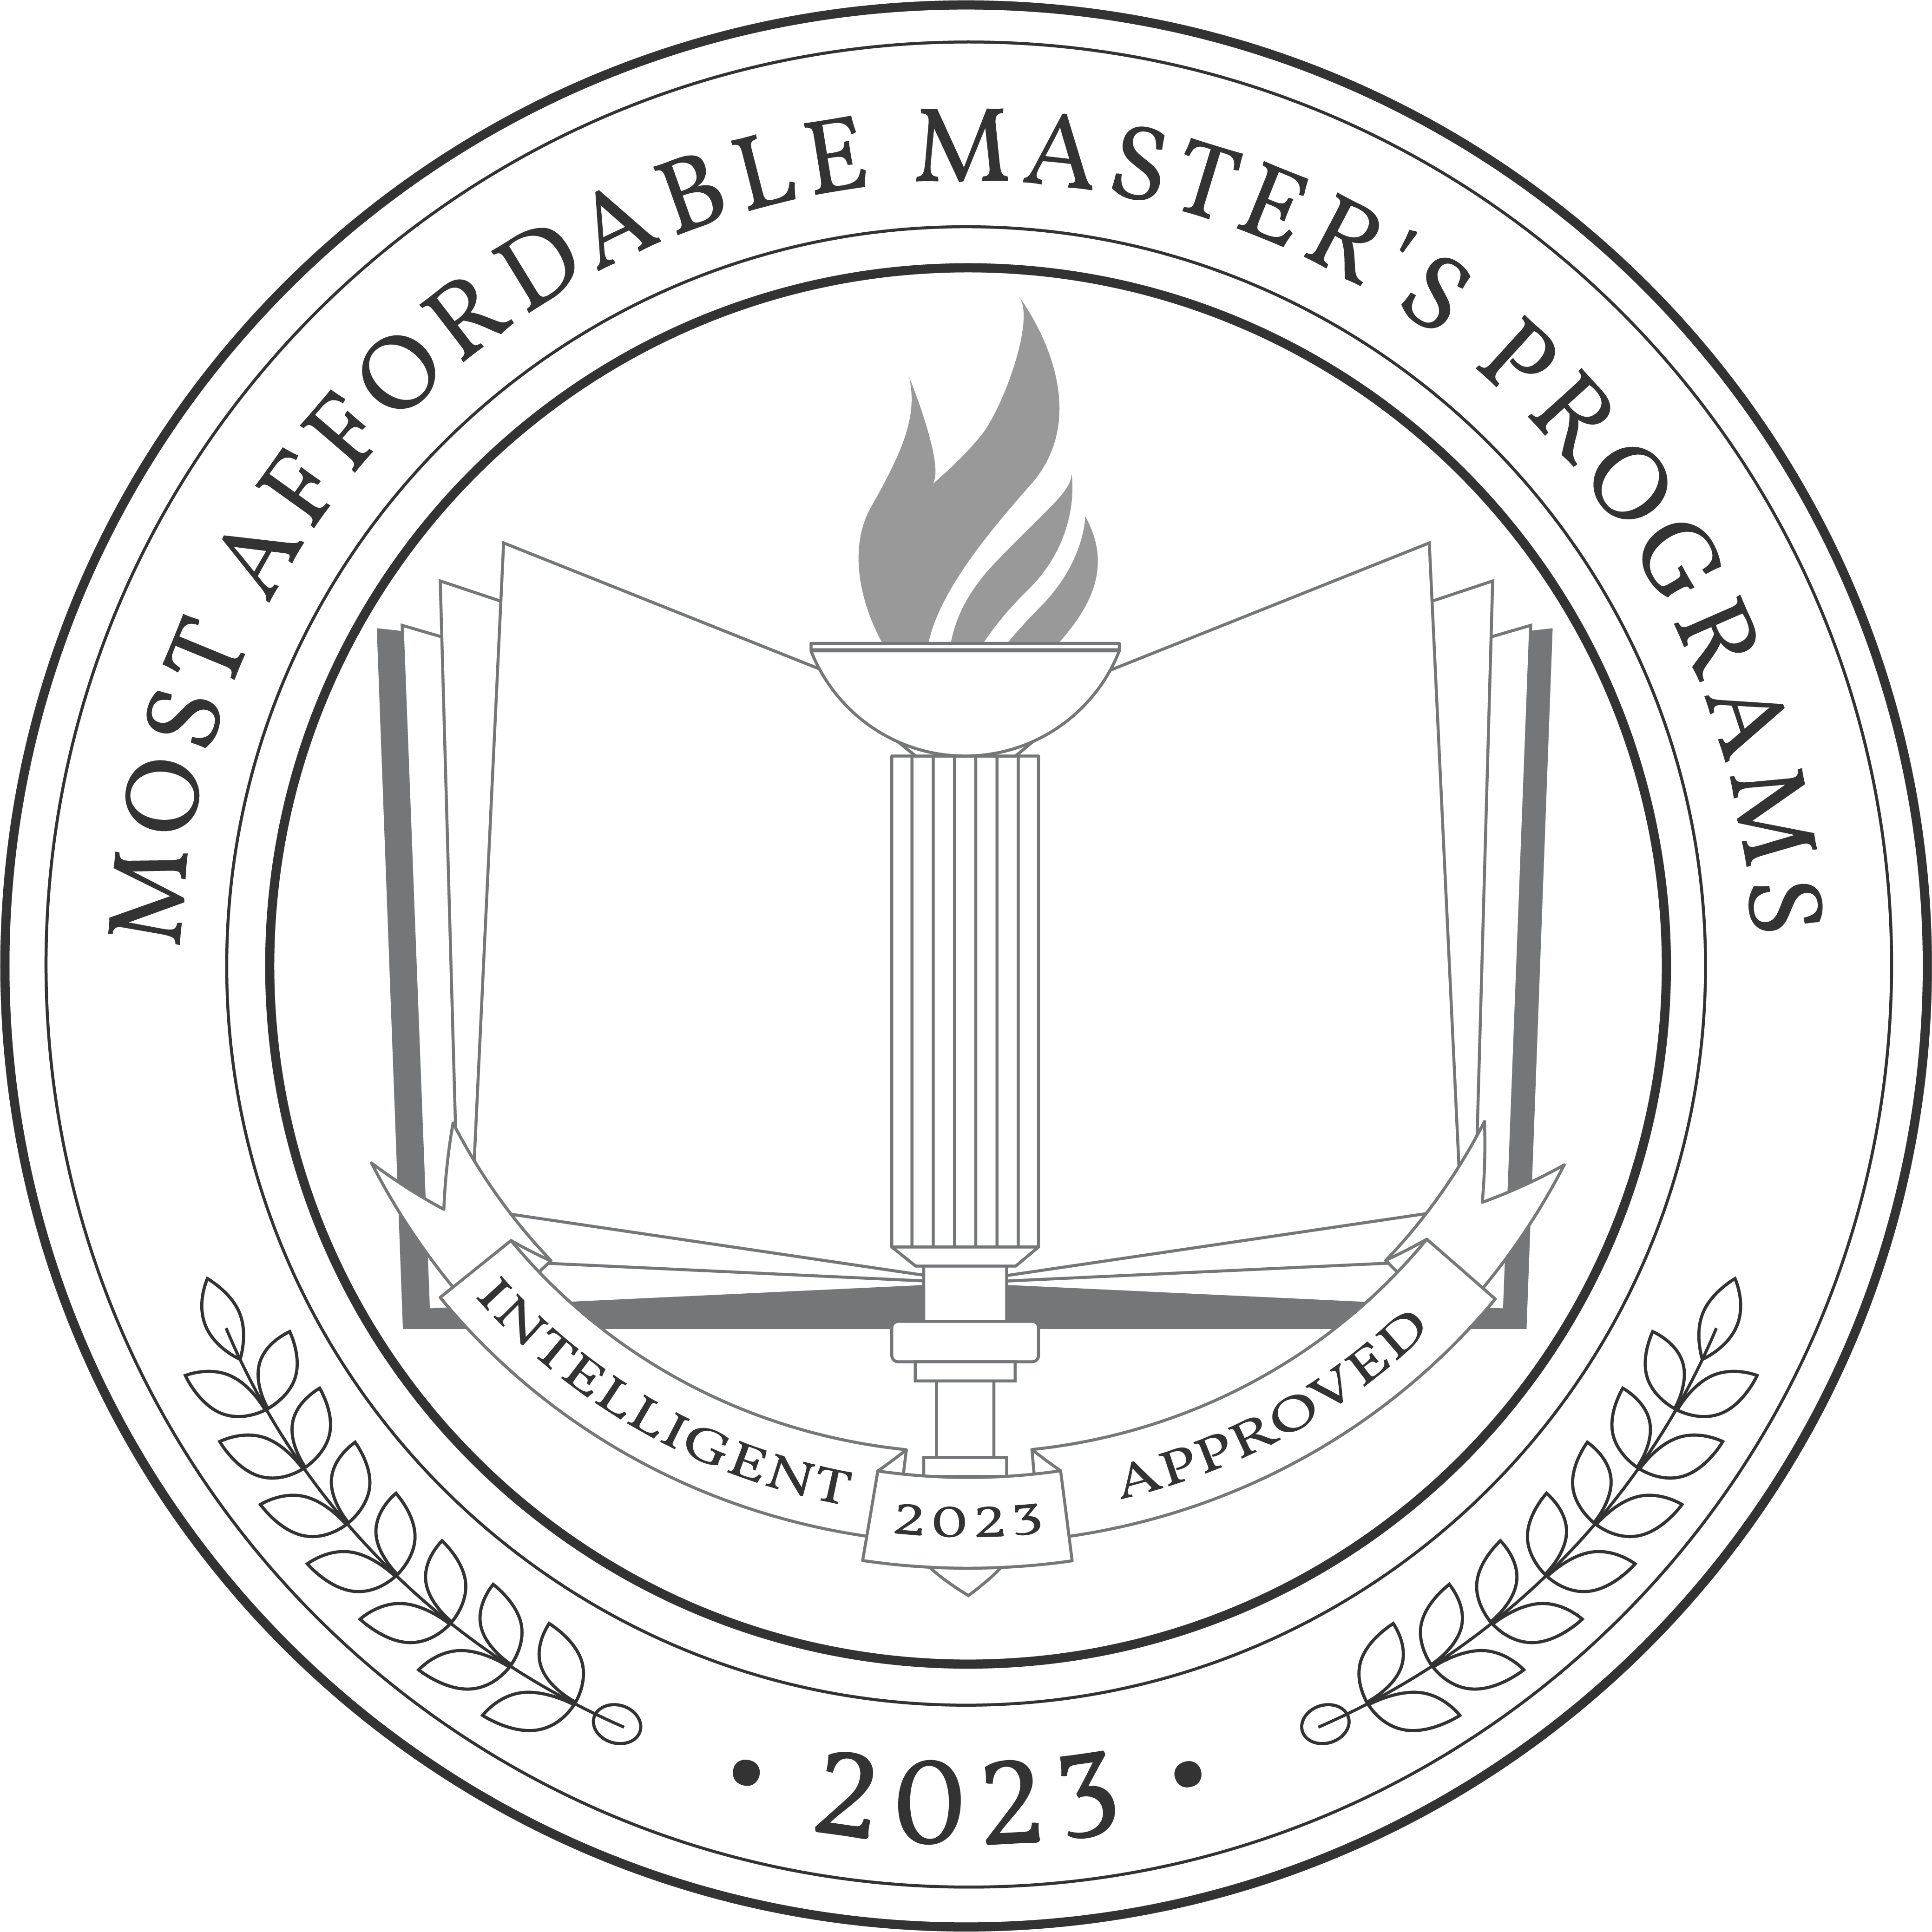 Most Affordable Master's Programs 2023 Badge